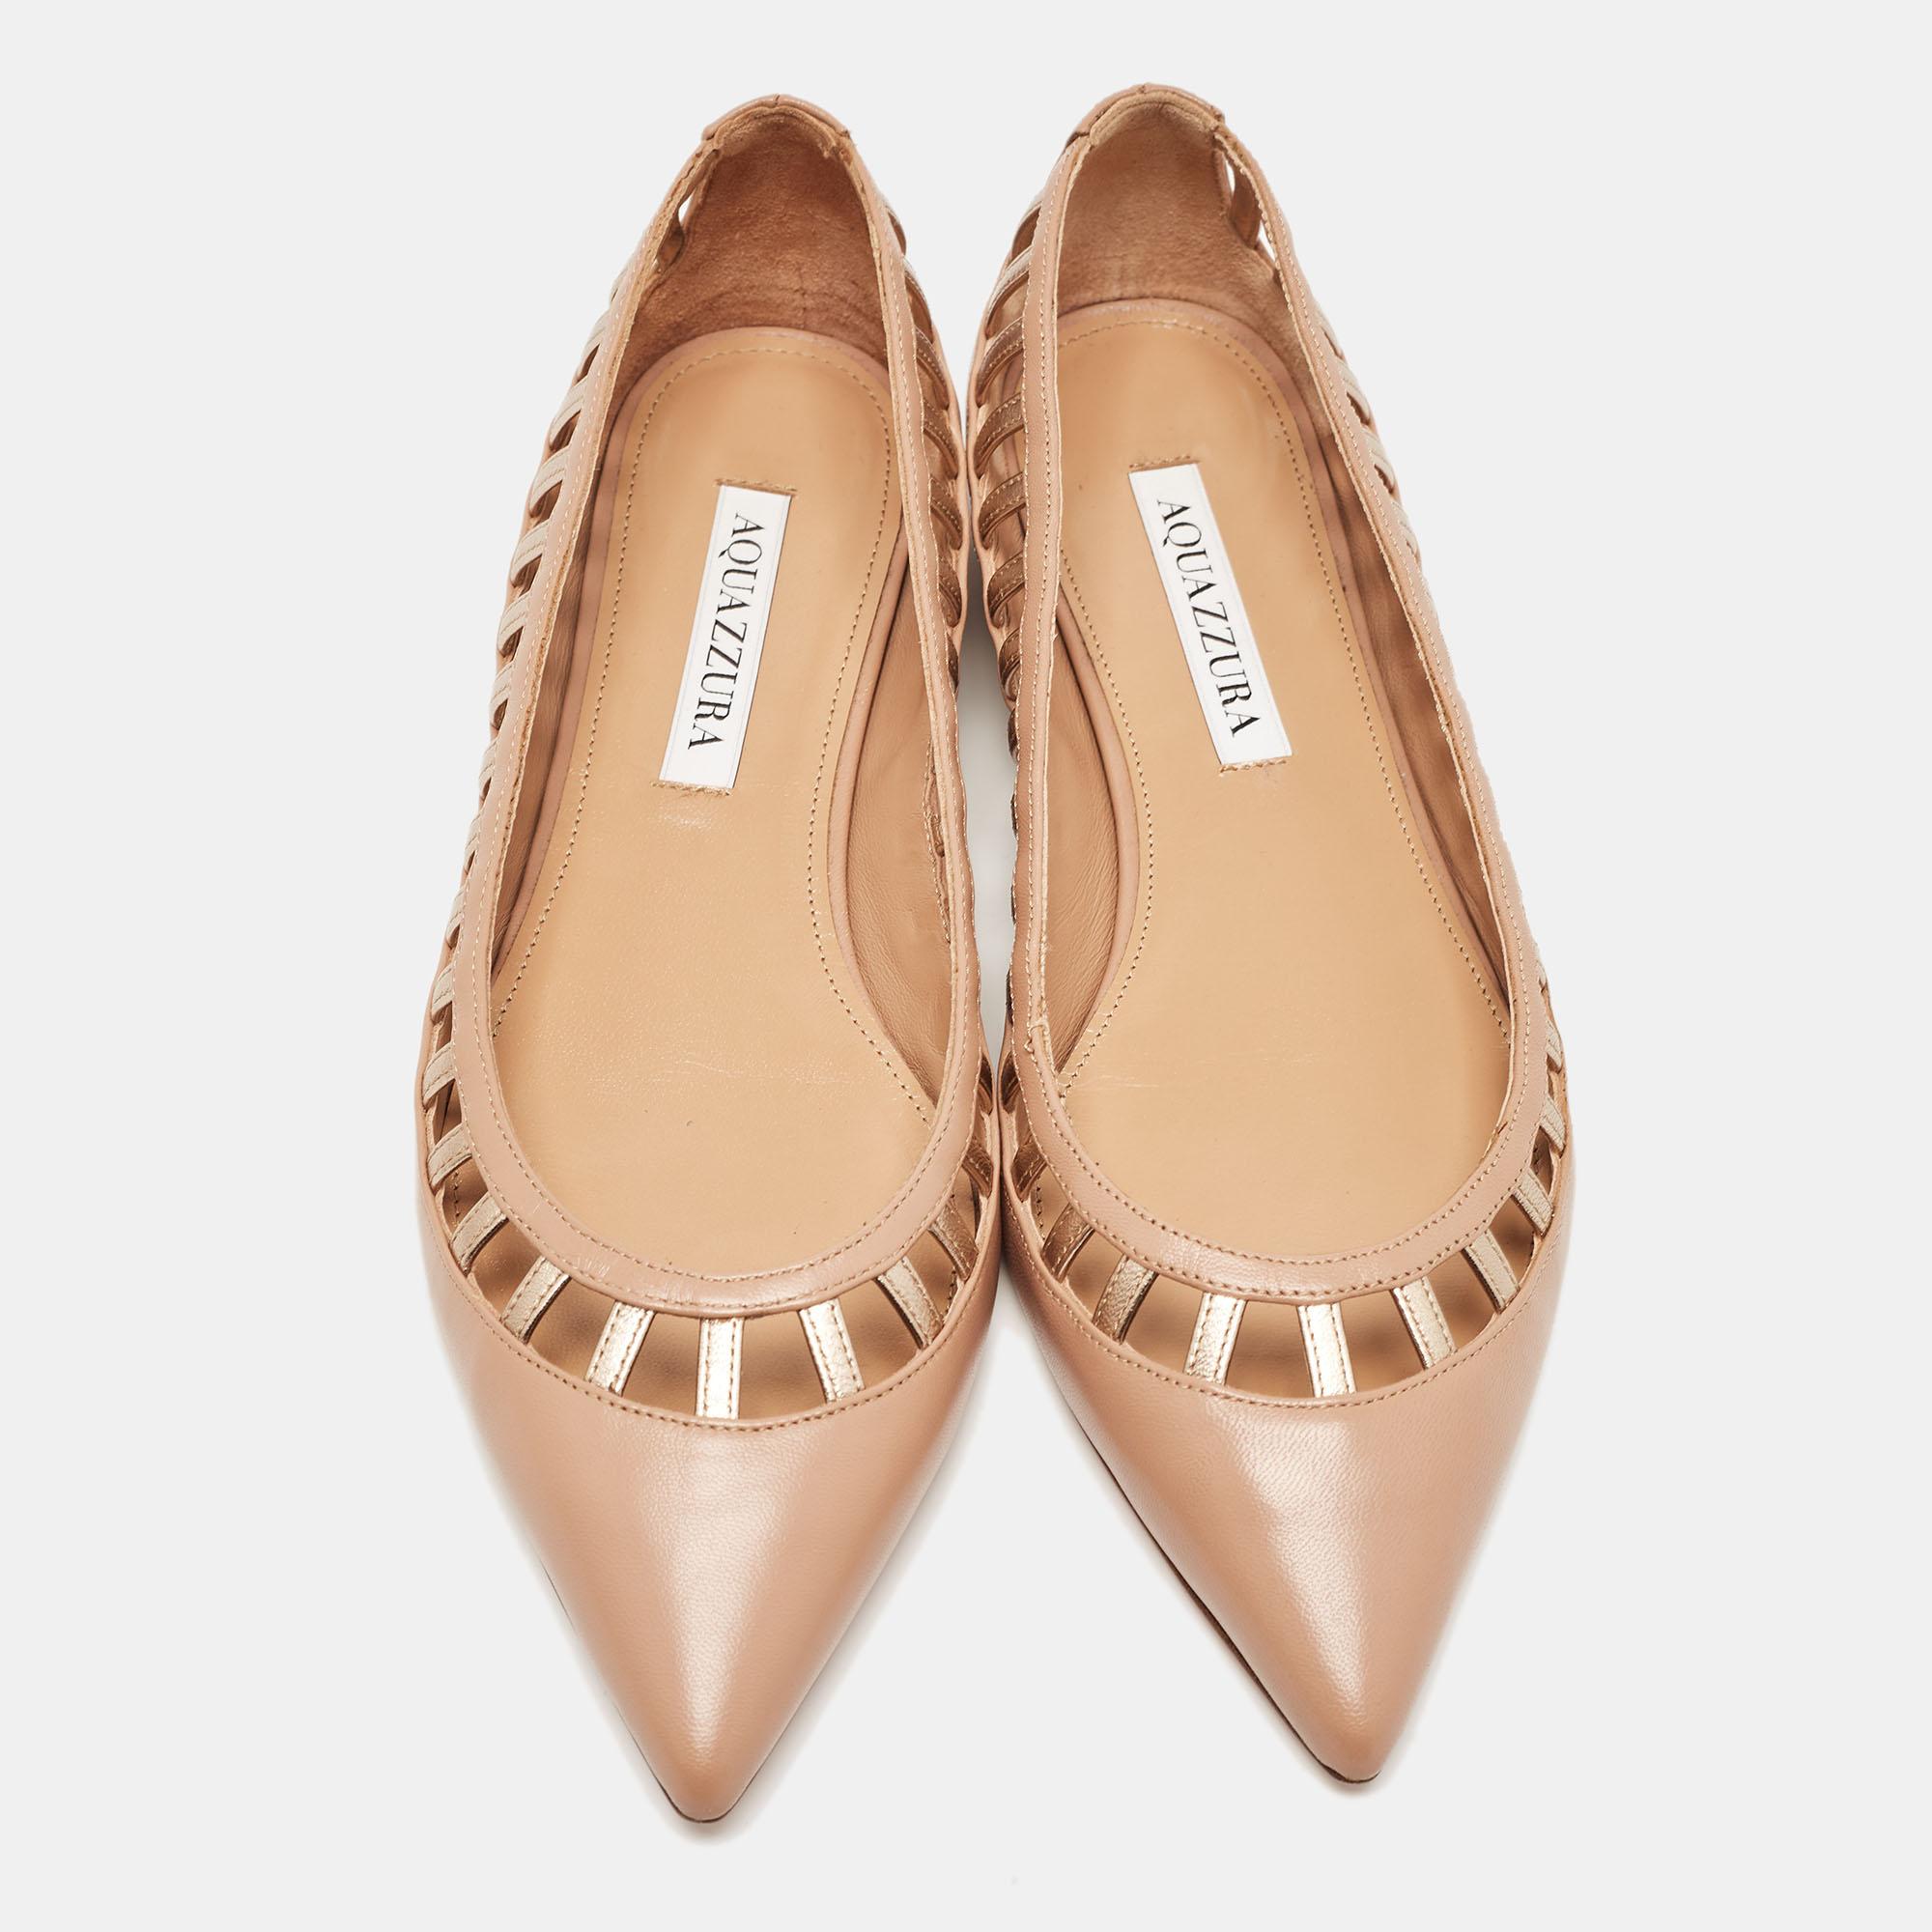 These ballet flats by Aquazzura are comfortable and chic to be matched with everything from a shirt dress to skinny jeans. Crafted from leather, they feature pointed toes and cut-out details.

Includes: Original Box

